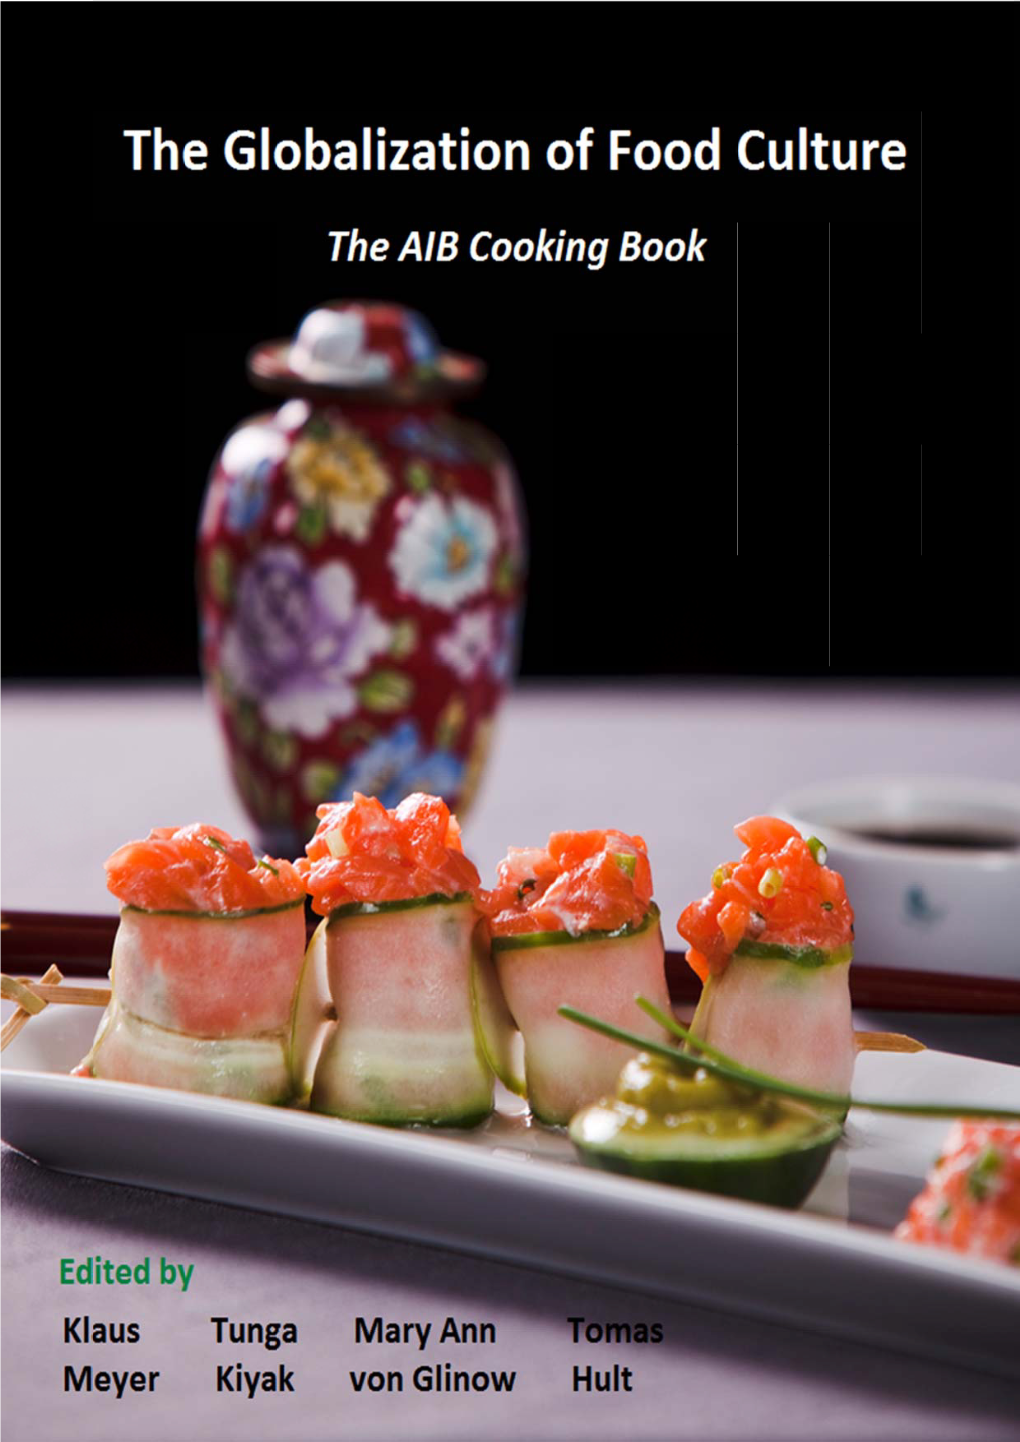 AIB Cooking Book: the Globalization of Food Culture